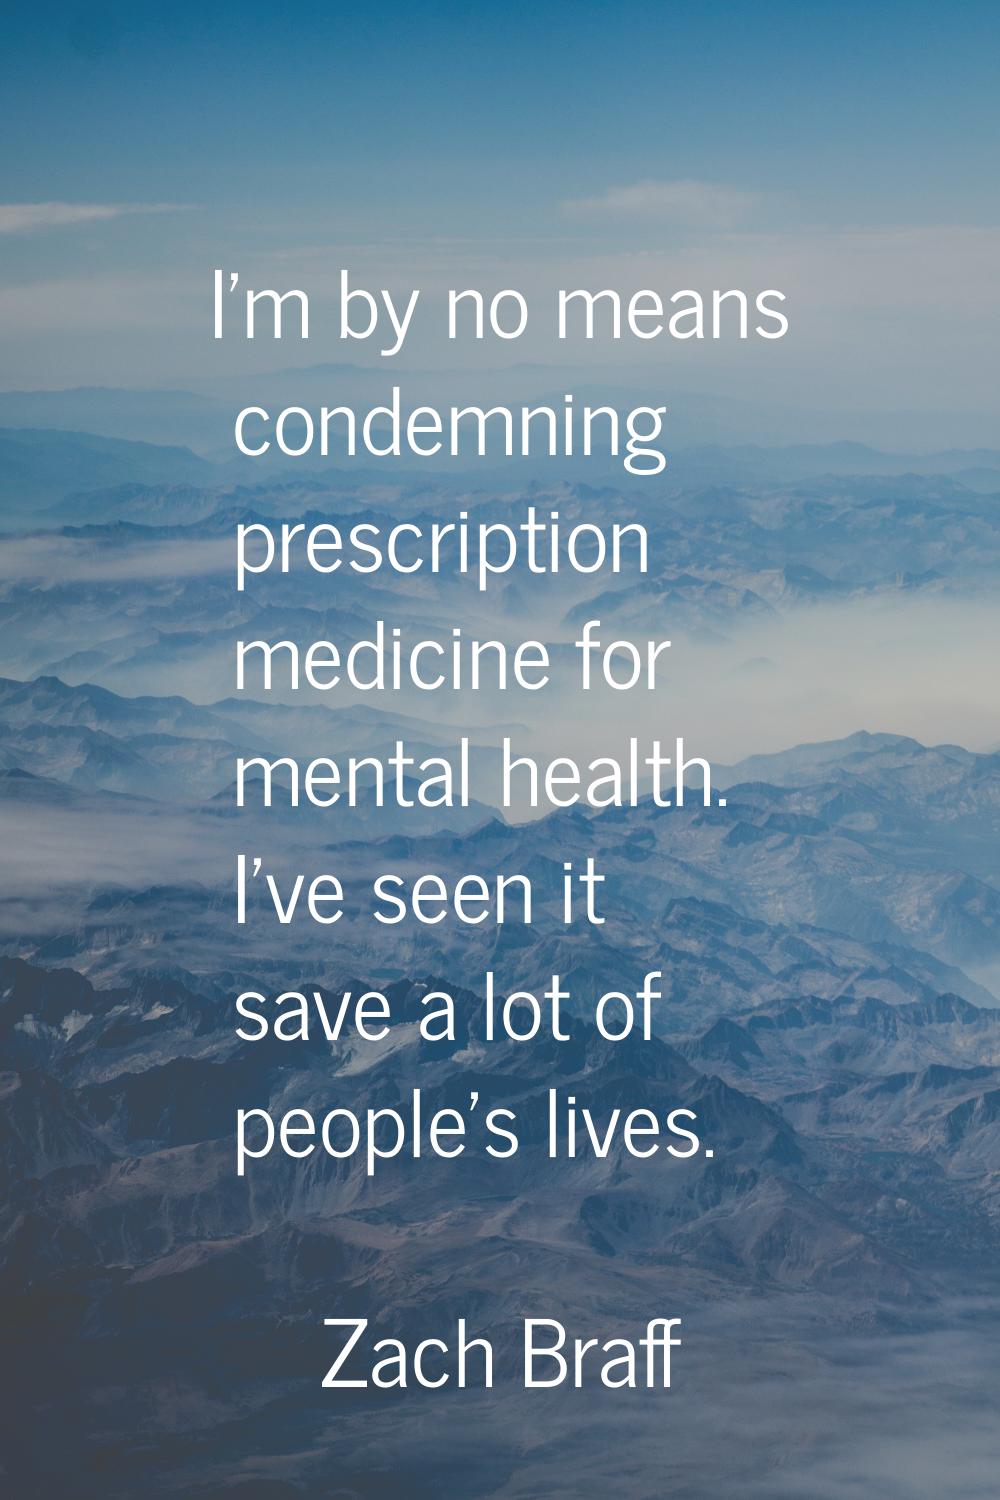 I'm by no means condemning prescription medicine for mental health. I've seen it save a lot of peop